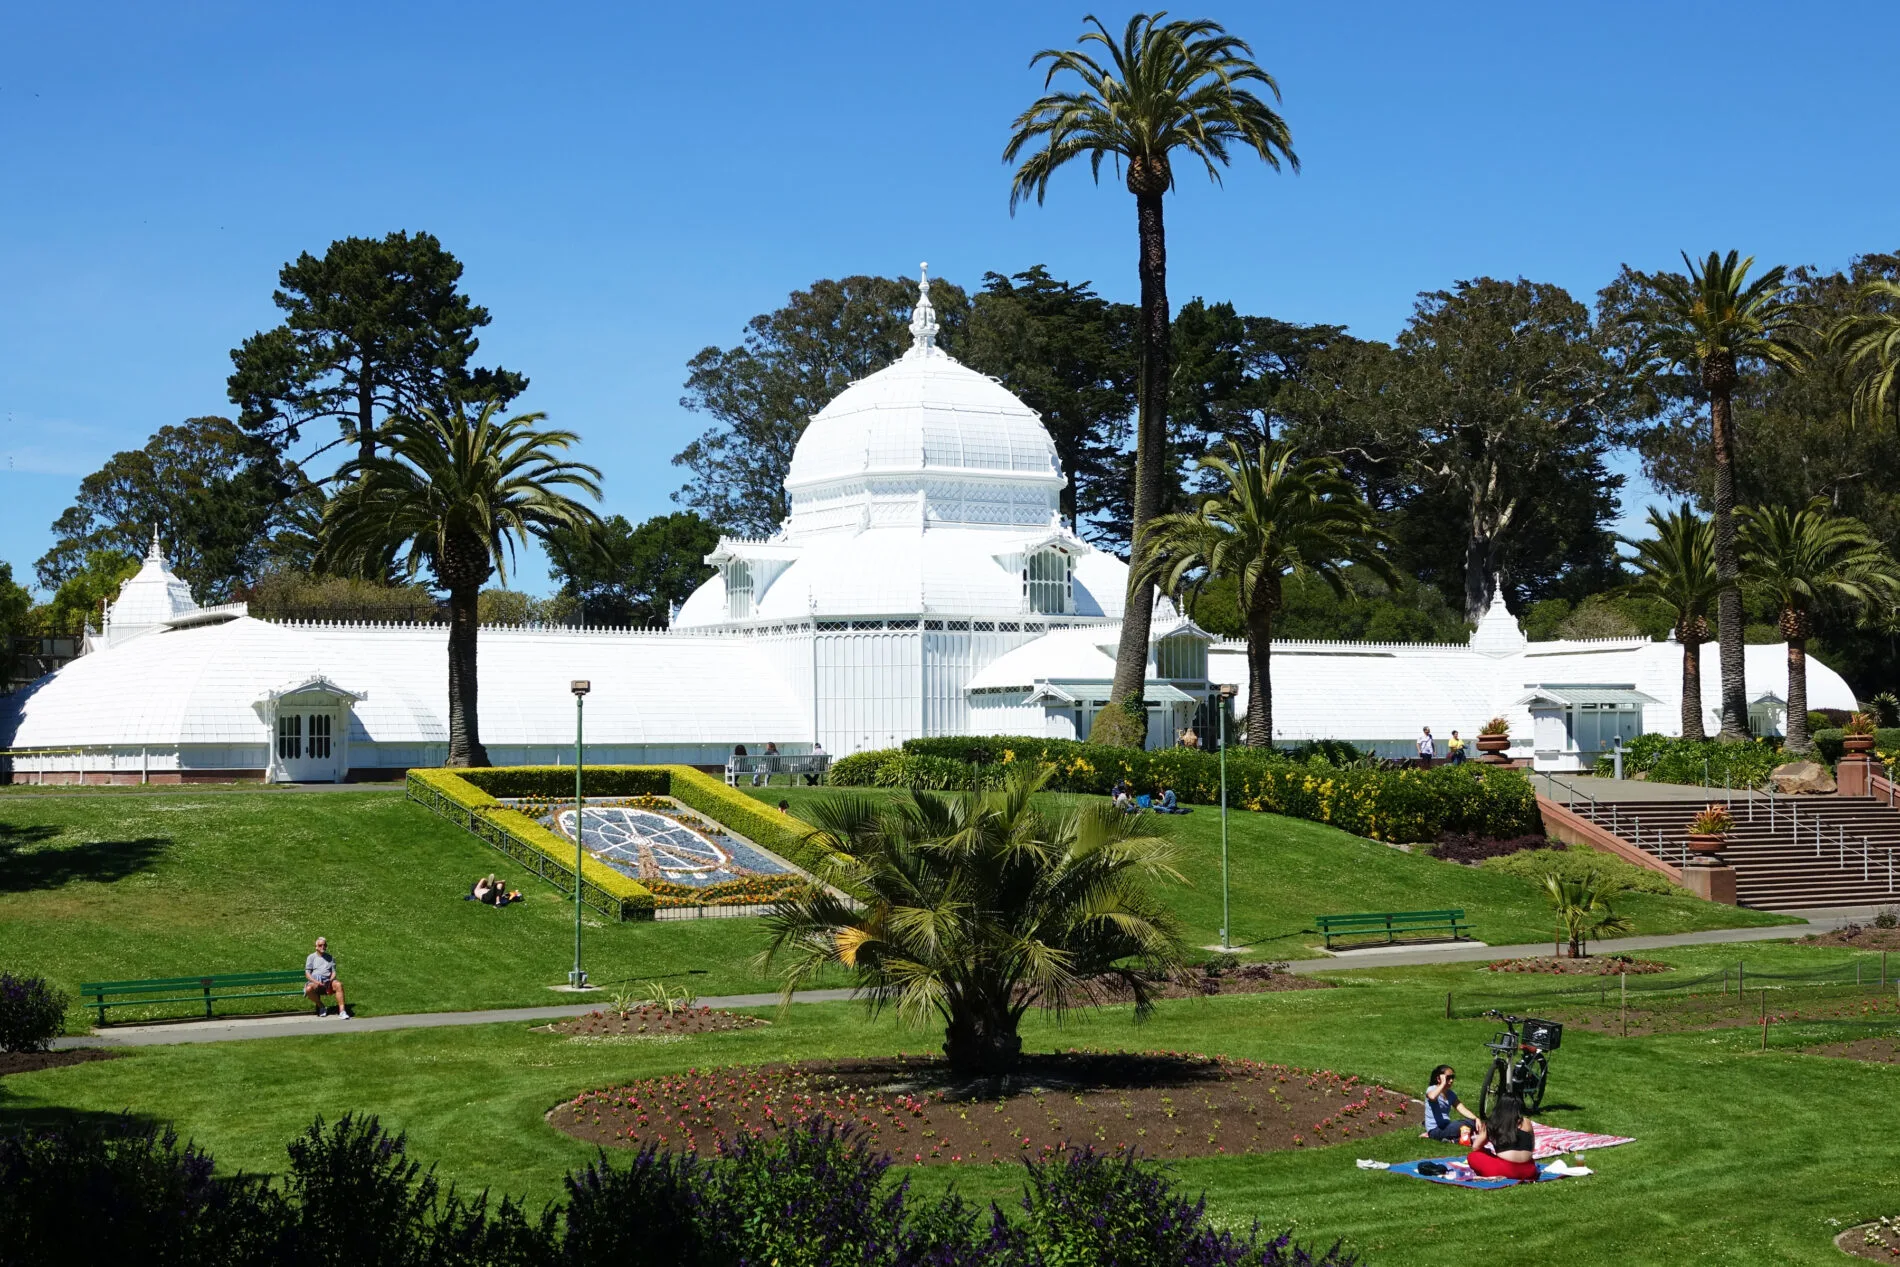 Visiting the Beautiful glass and wood Conservatory of Flowers is one of the best things to do in Golden Gate Park.